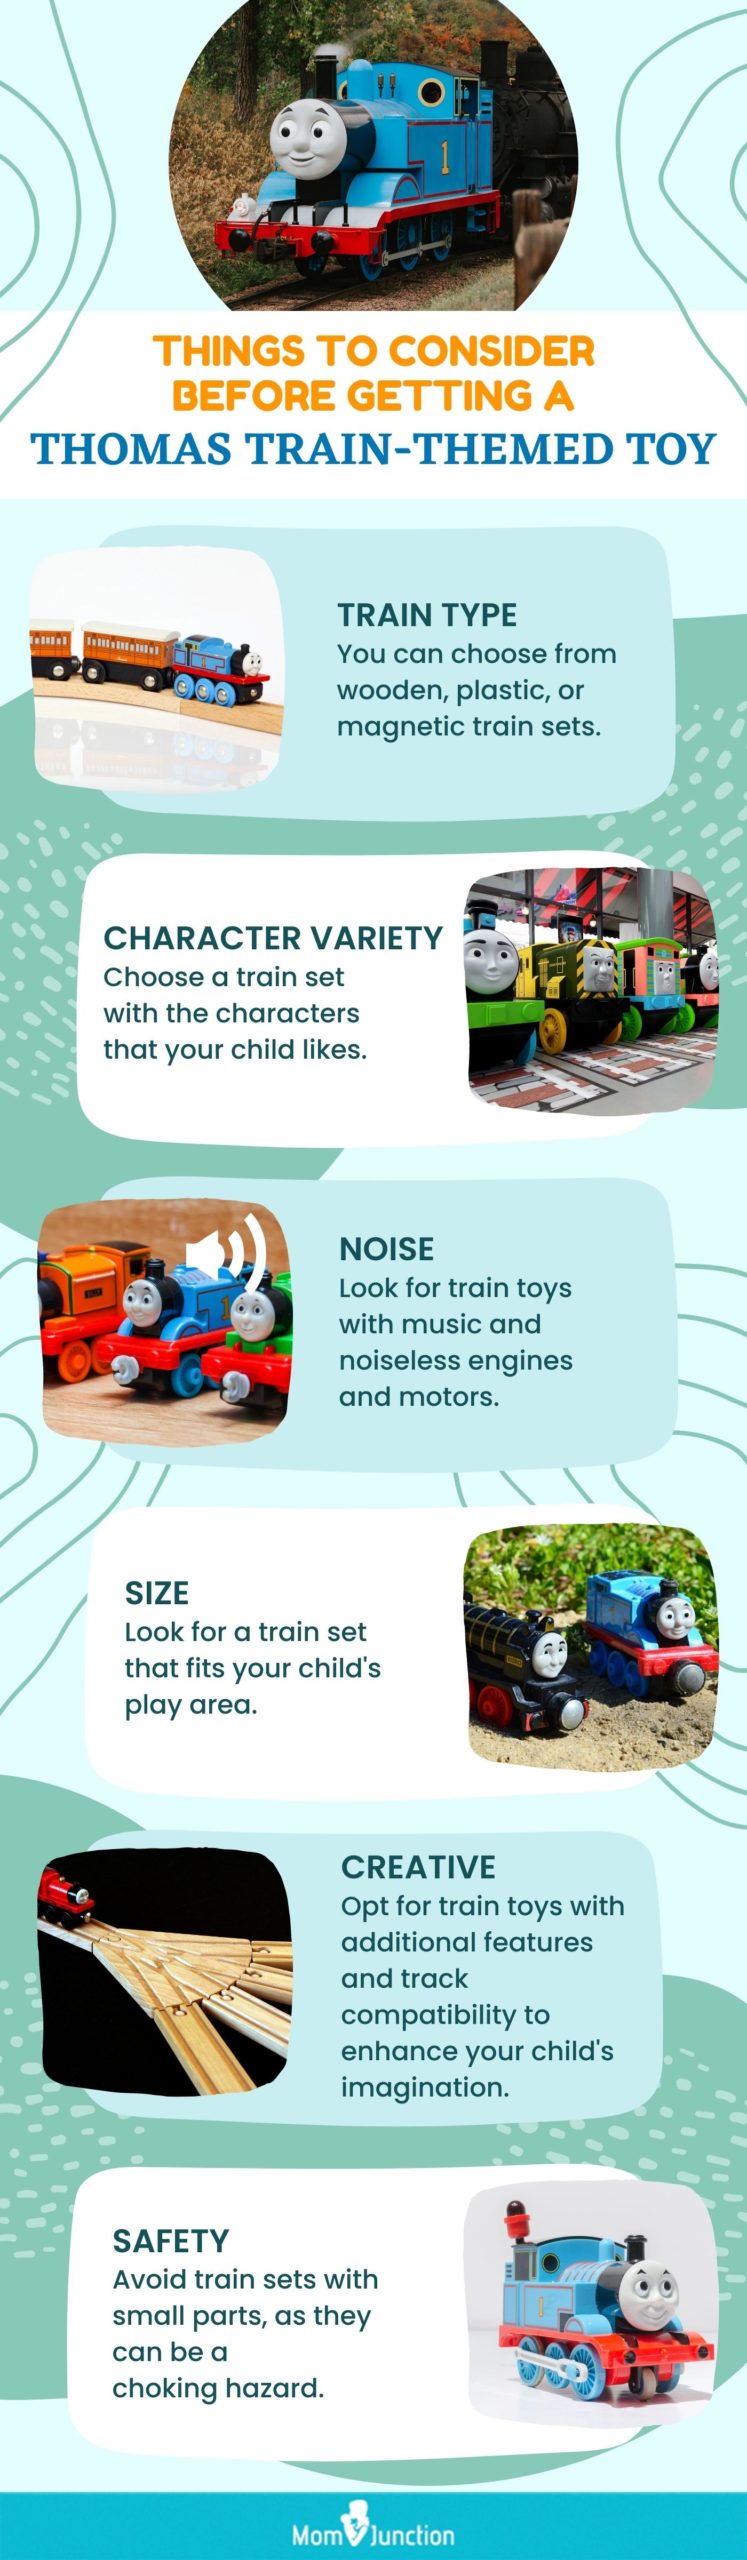 Things To Consider Before Getting A Thomas Train-Themed Toy (Infographic)